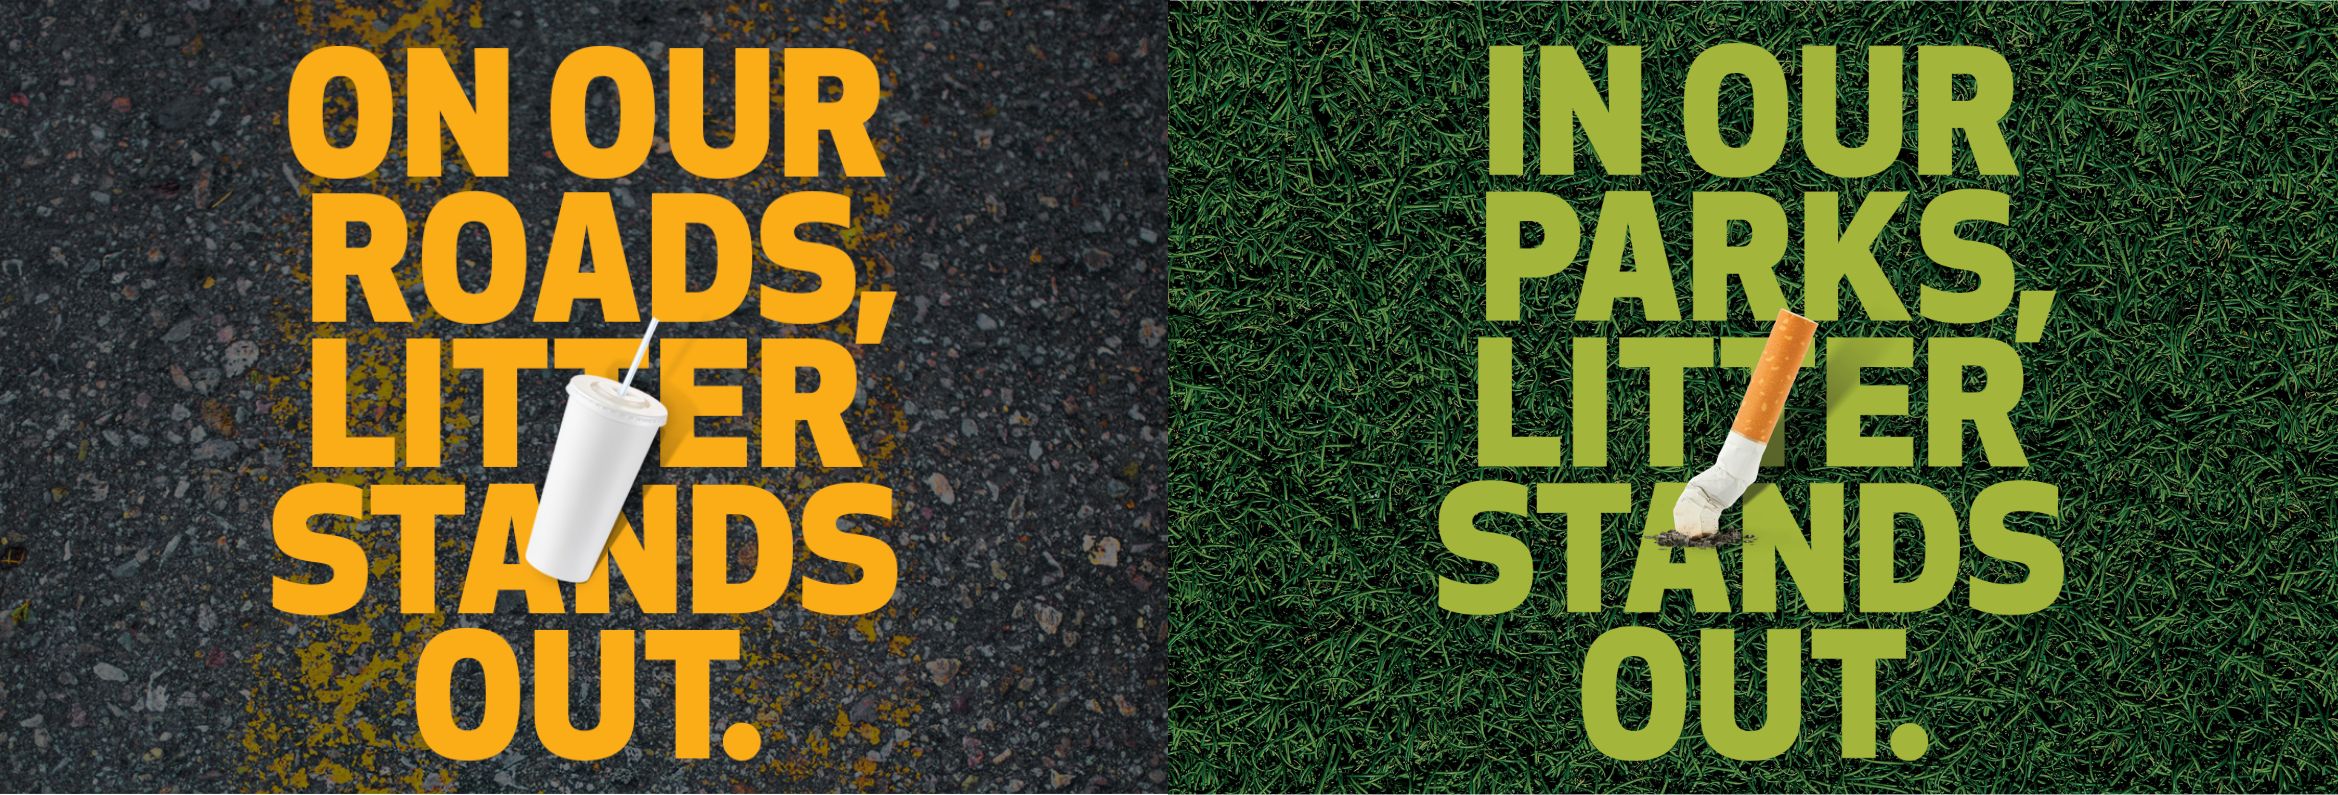 Two poster images of the DNS litter campaign